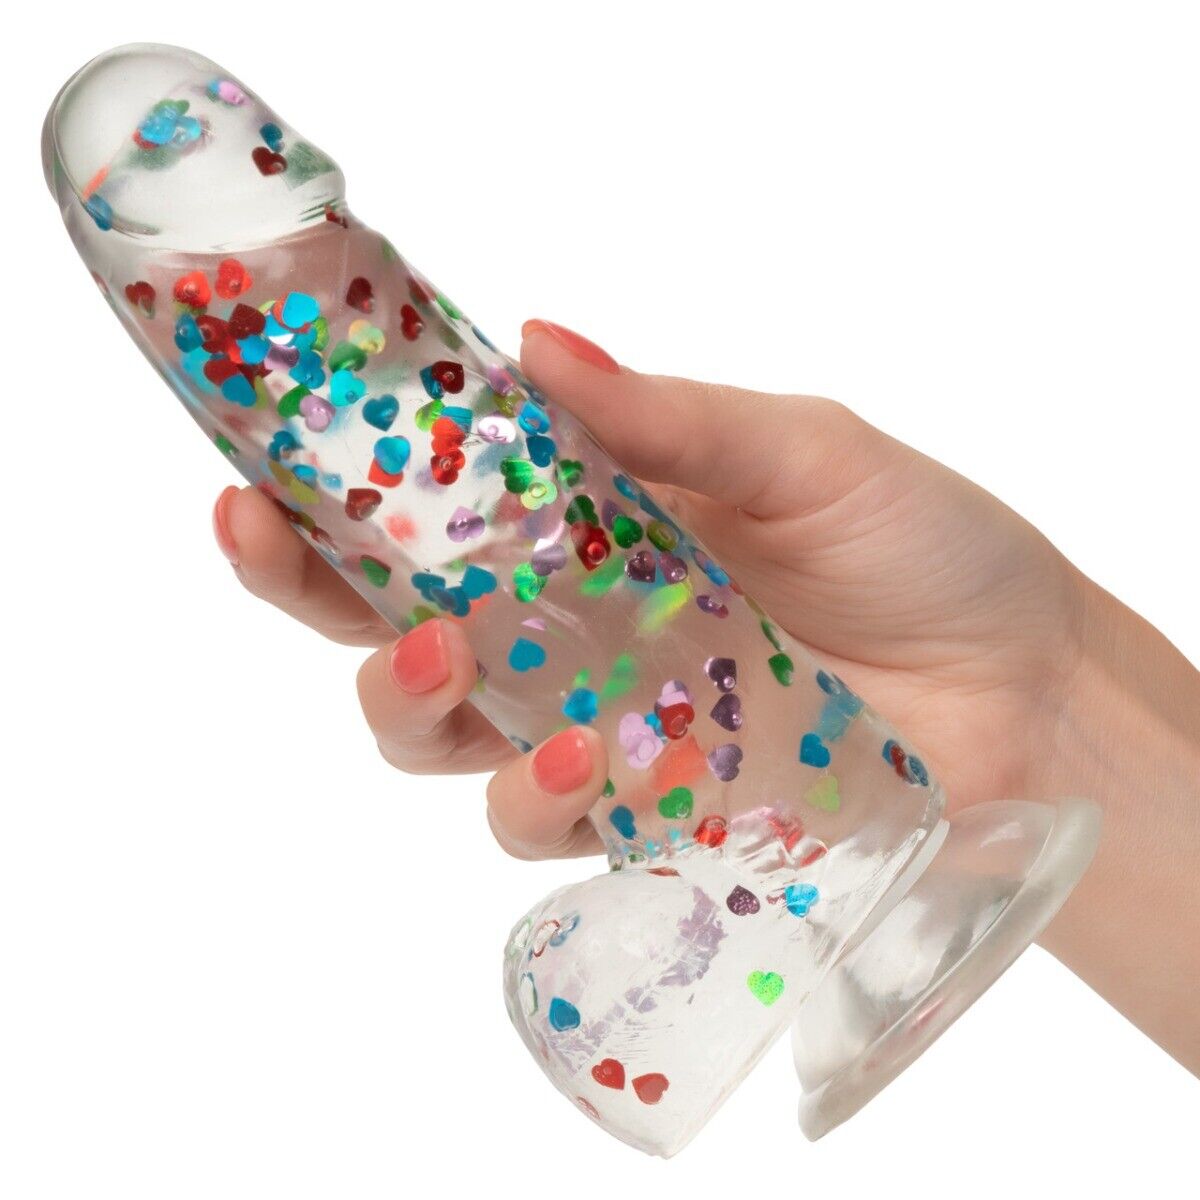 Naughty Bits I Love Dick Confetti Heart-filled Realistic Dildo Dong Suction Cup